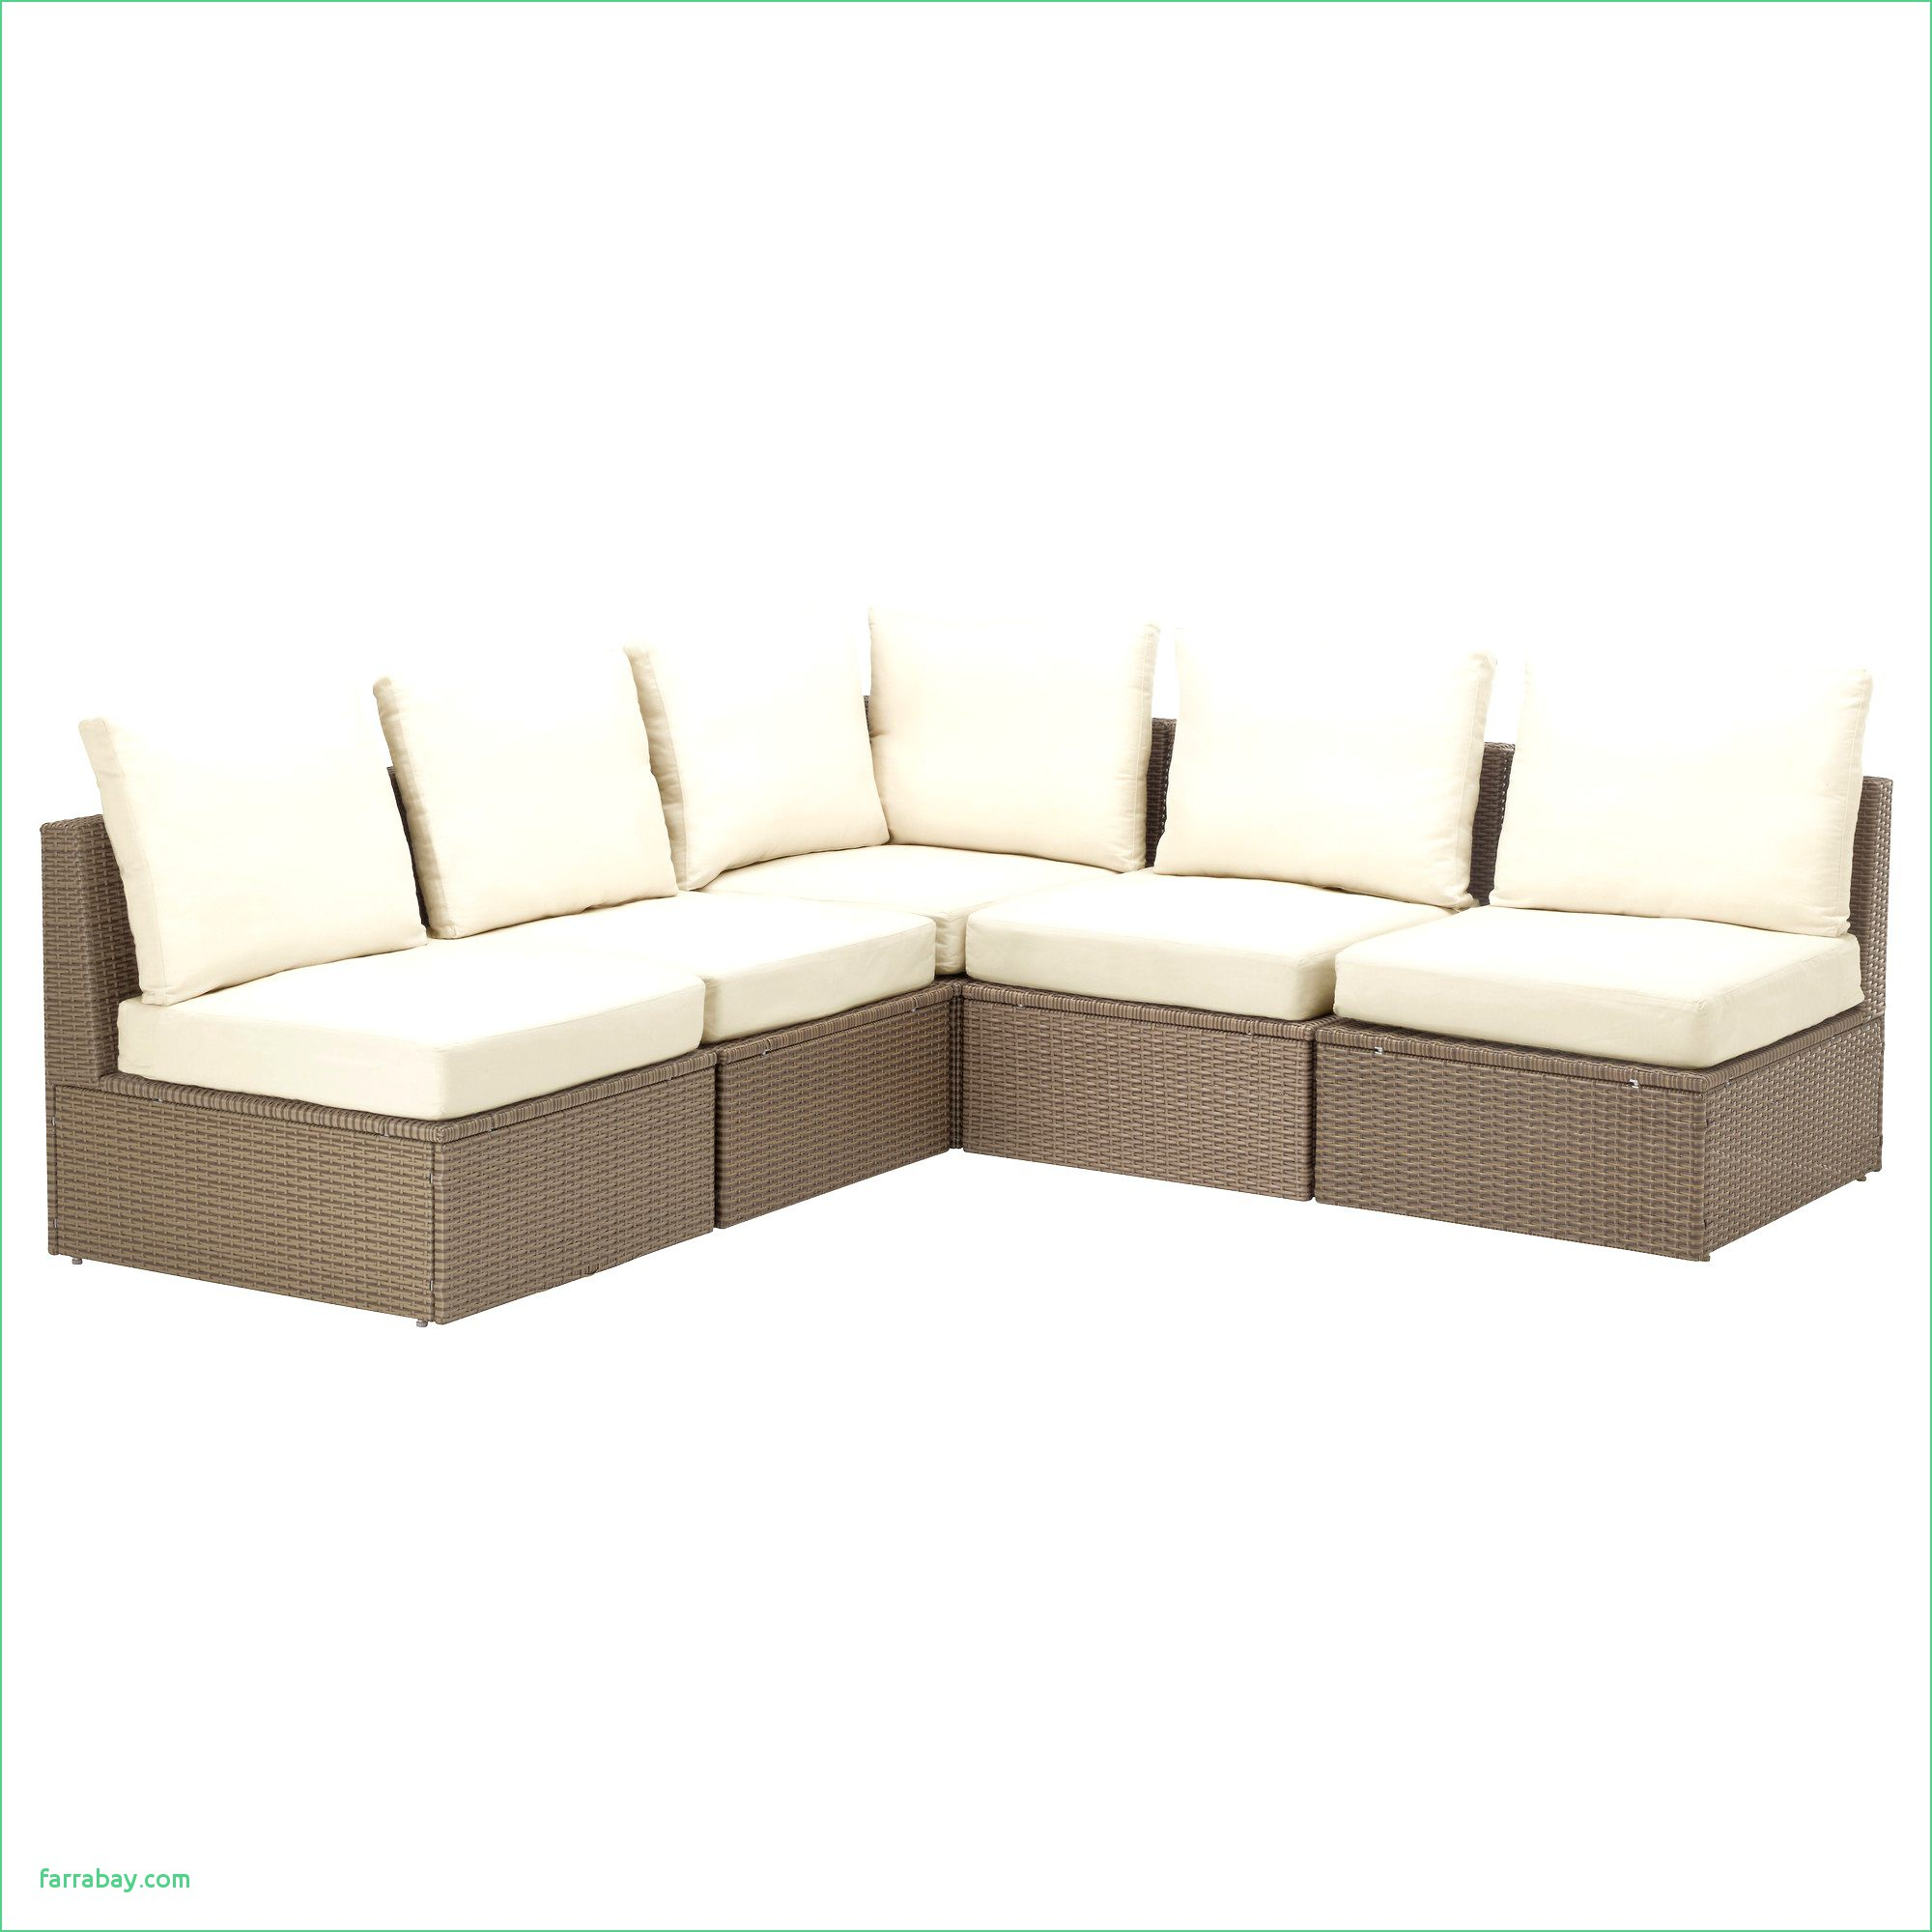 Lovely Garden Furniture Ikeabest Garden Furniture intended for proportions 2000 X 2000